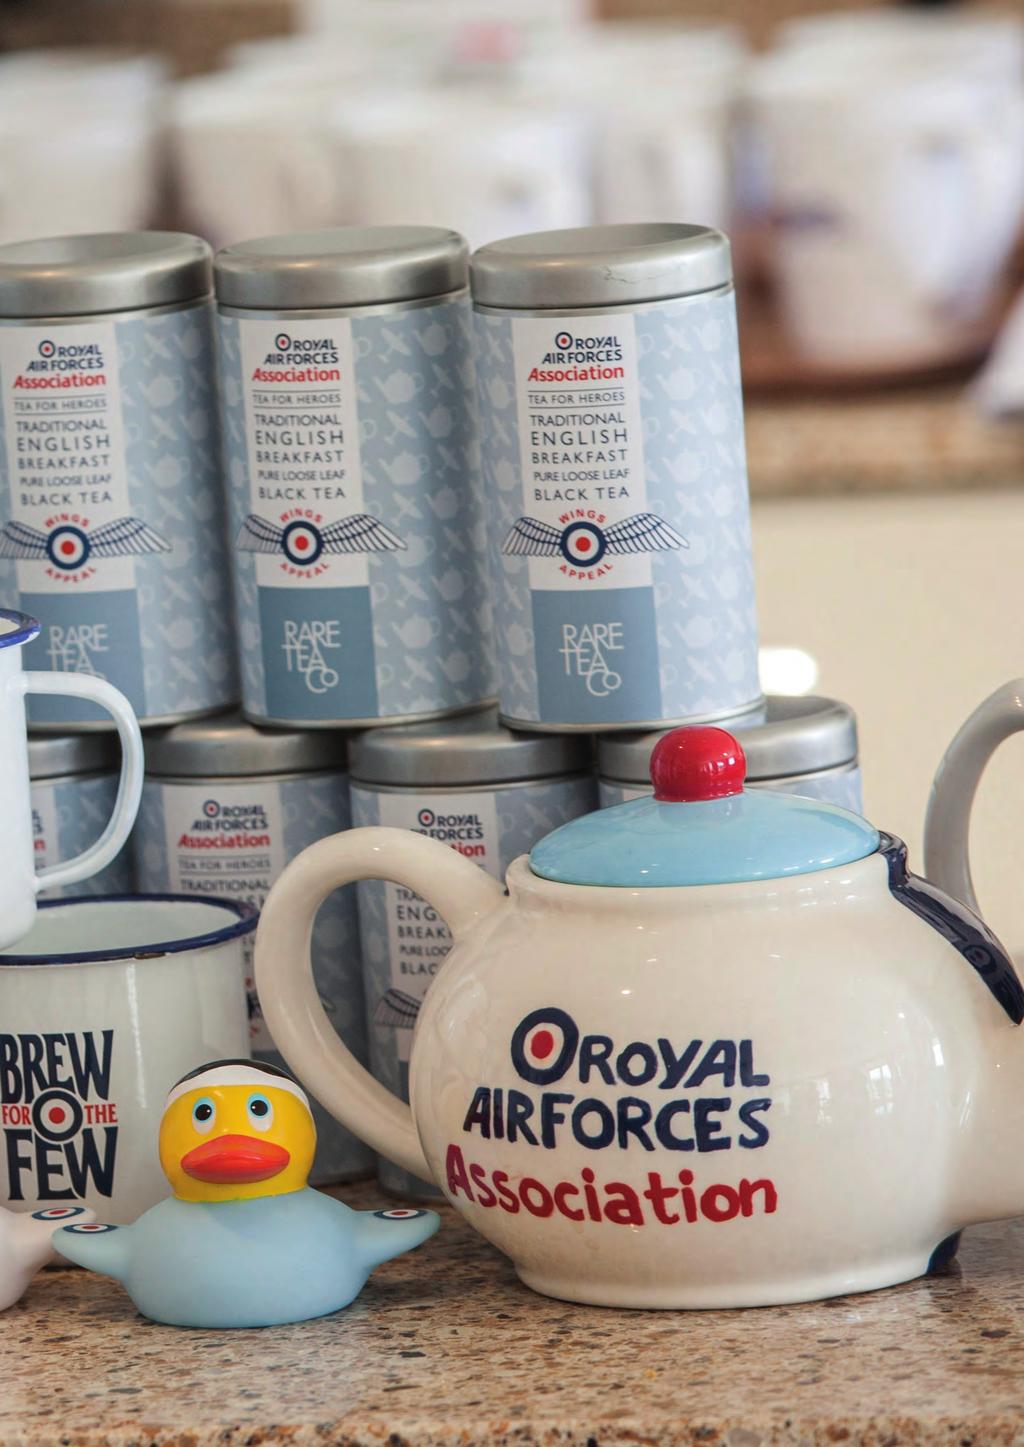 THANK YOU! Thank you for getting involved in fundraising for the Royal Air Forces Association. We rely on our fantastic supporters for the essential funds we need to carry on our important work.